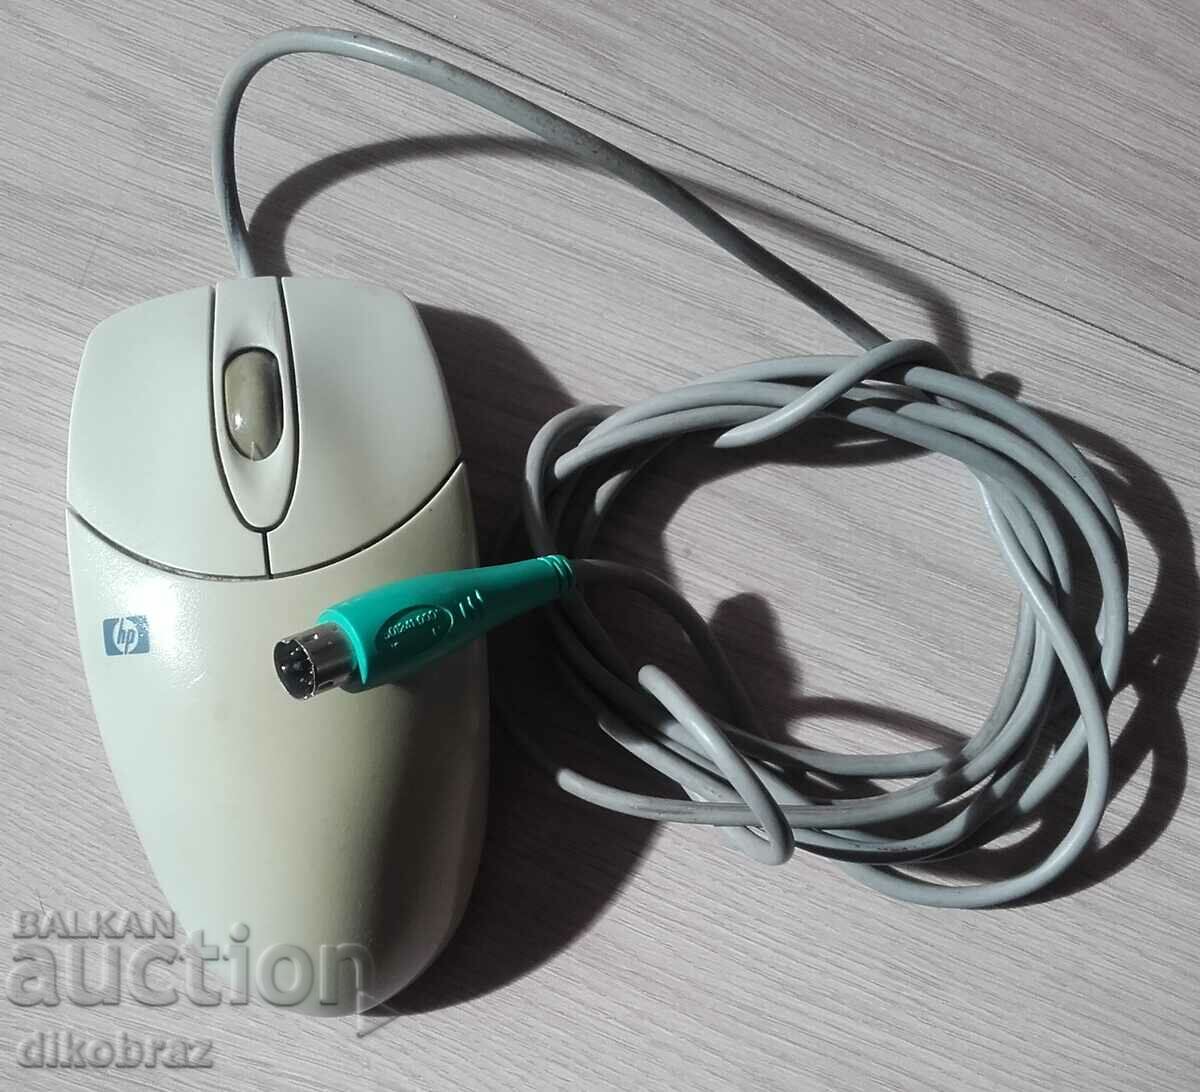 HP computer mouse - from a penny